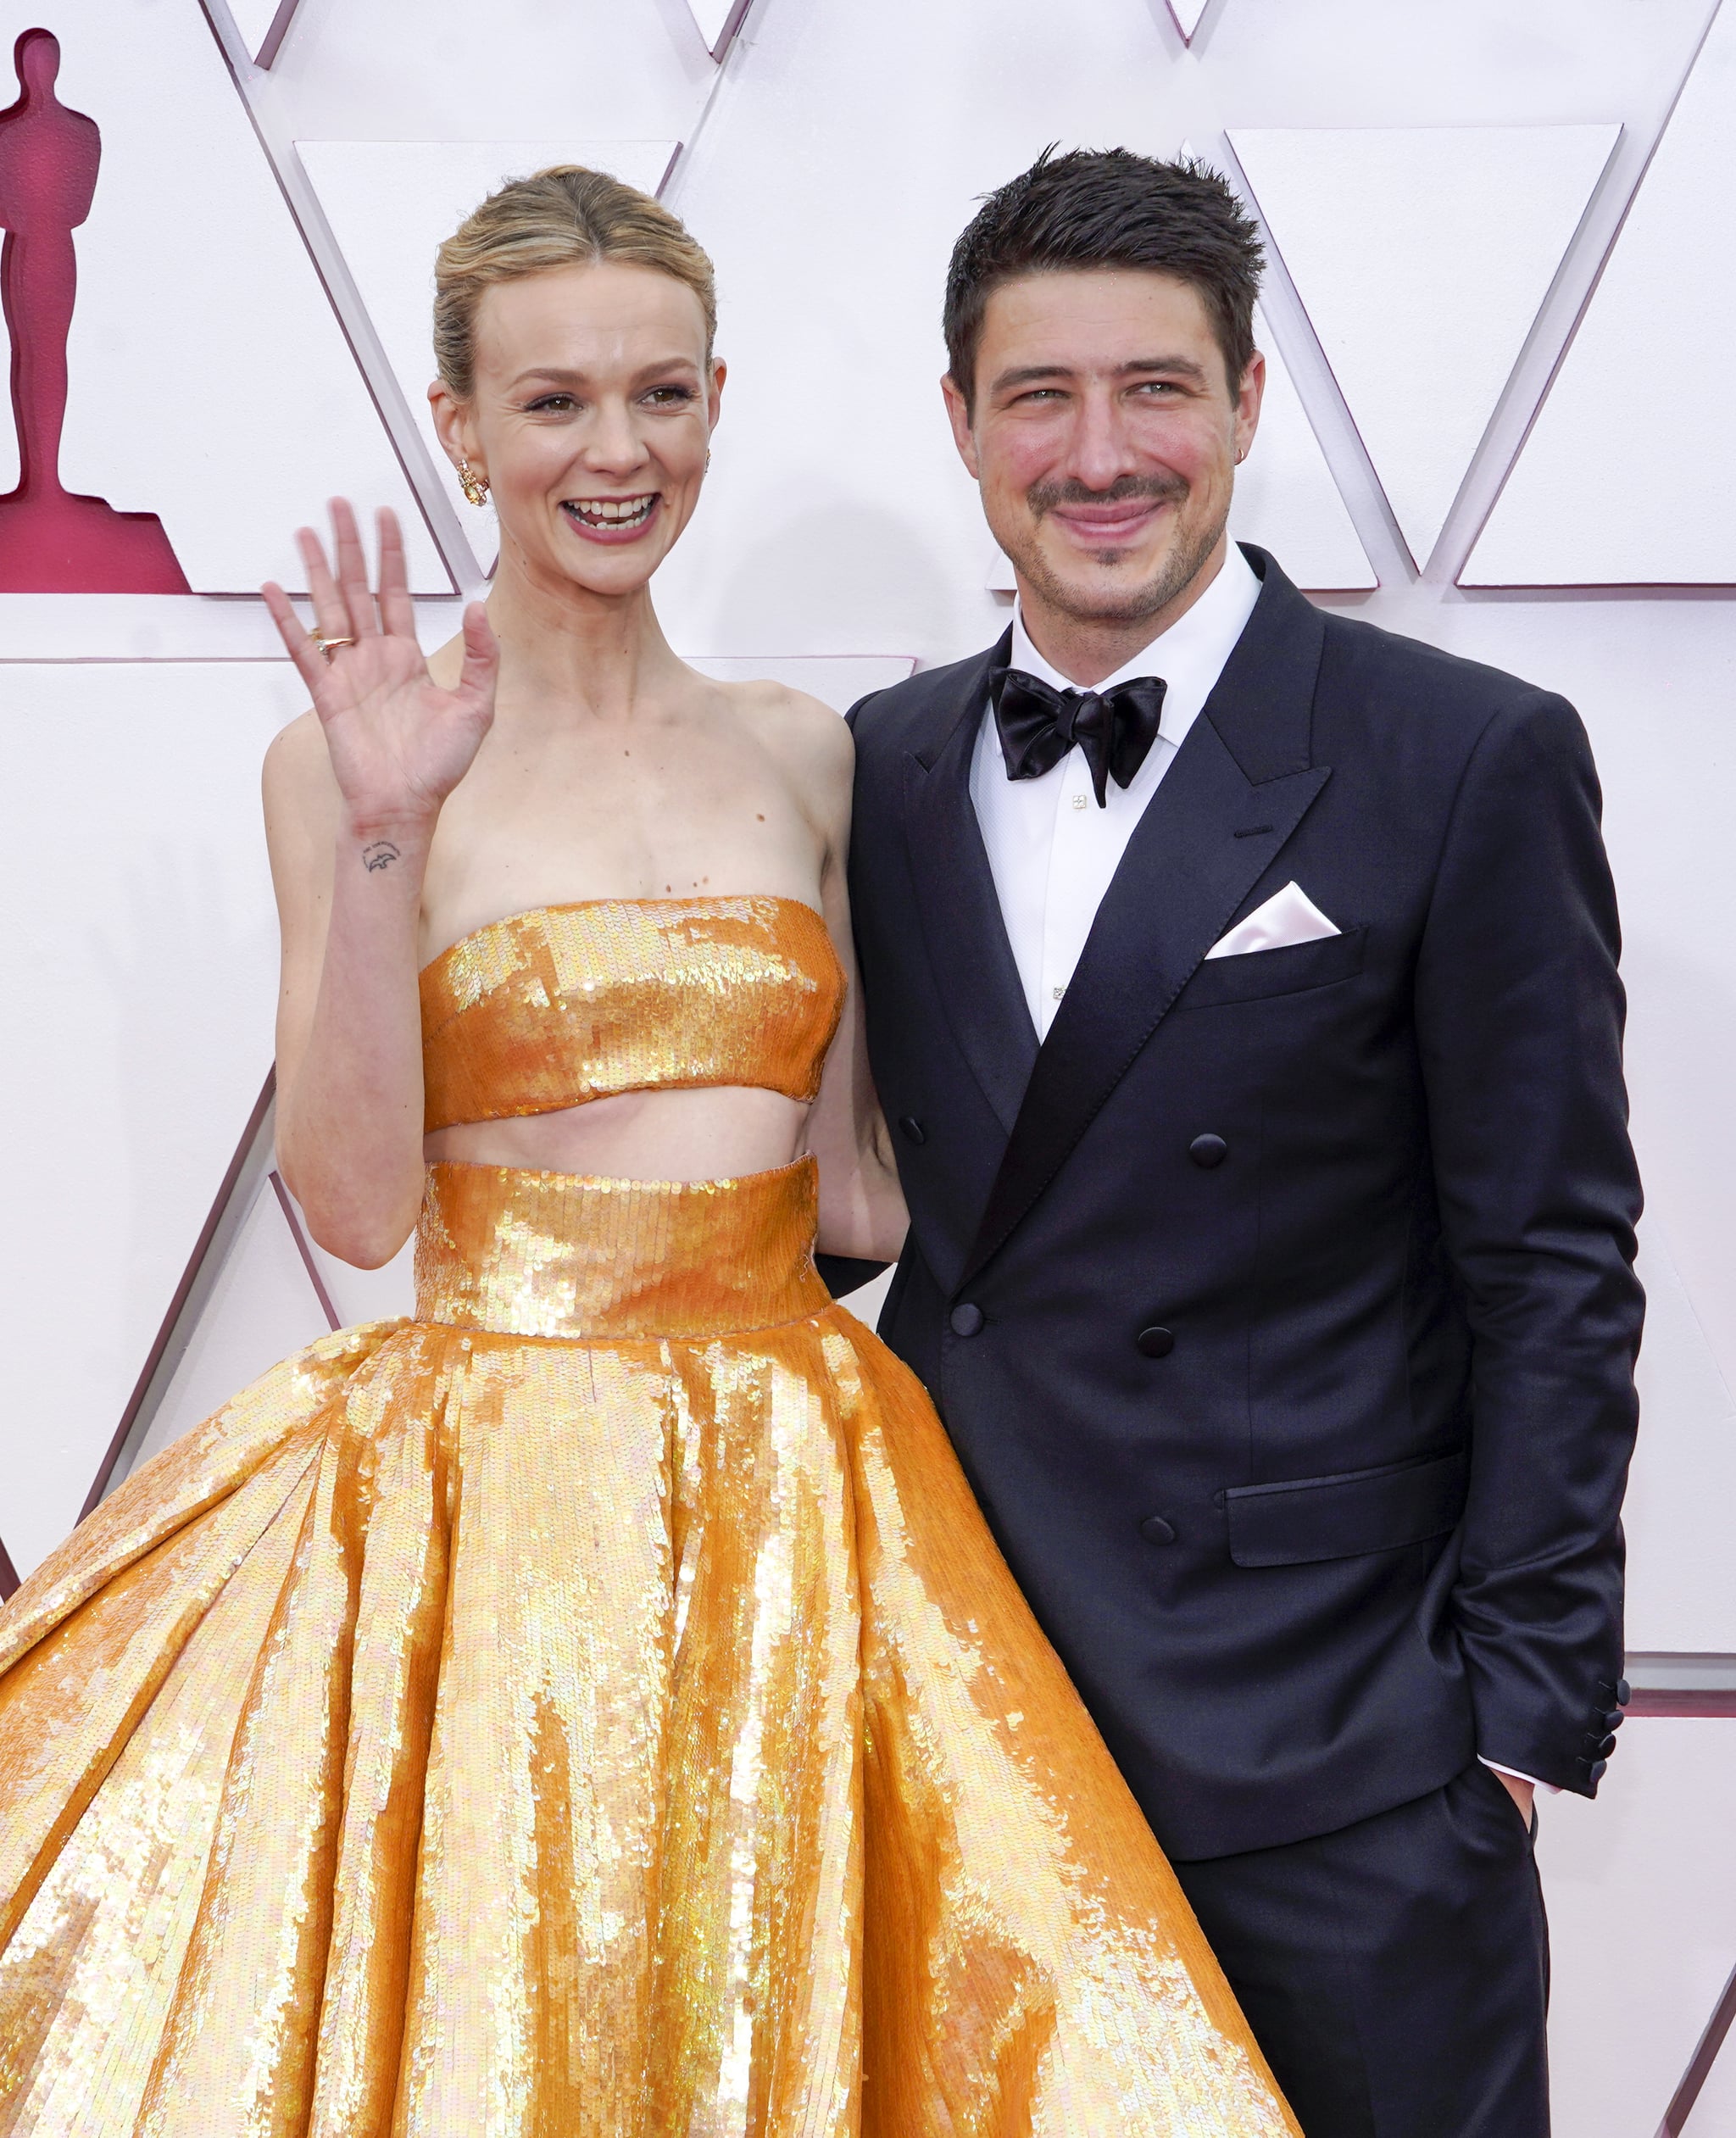 LOS ANGELES, CALIFORNIA – APRIL 25: (L-R) Carey Mulligan and Marcus Mumford attend the 93rd Annual Academy Awards at Union Station on April 25, 2021 in Los Angeles, California. (Photo by Chris Pizzello-Pool/Getty Images)